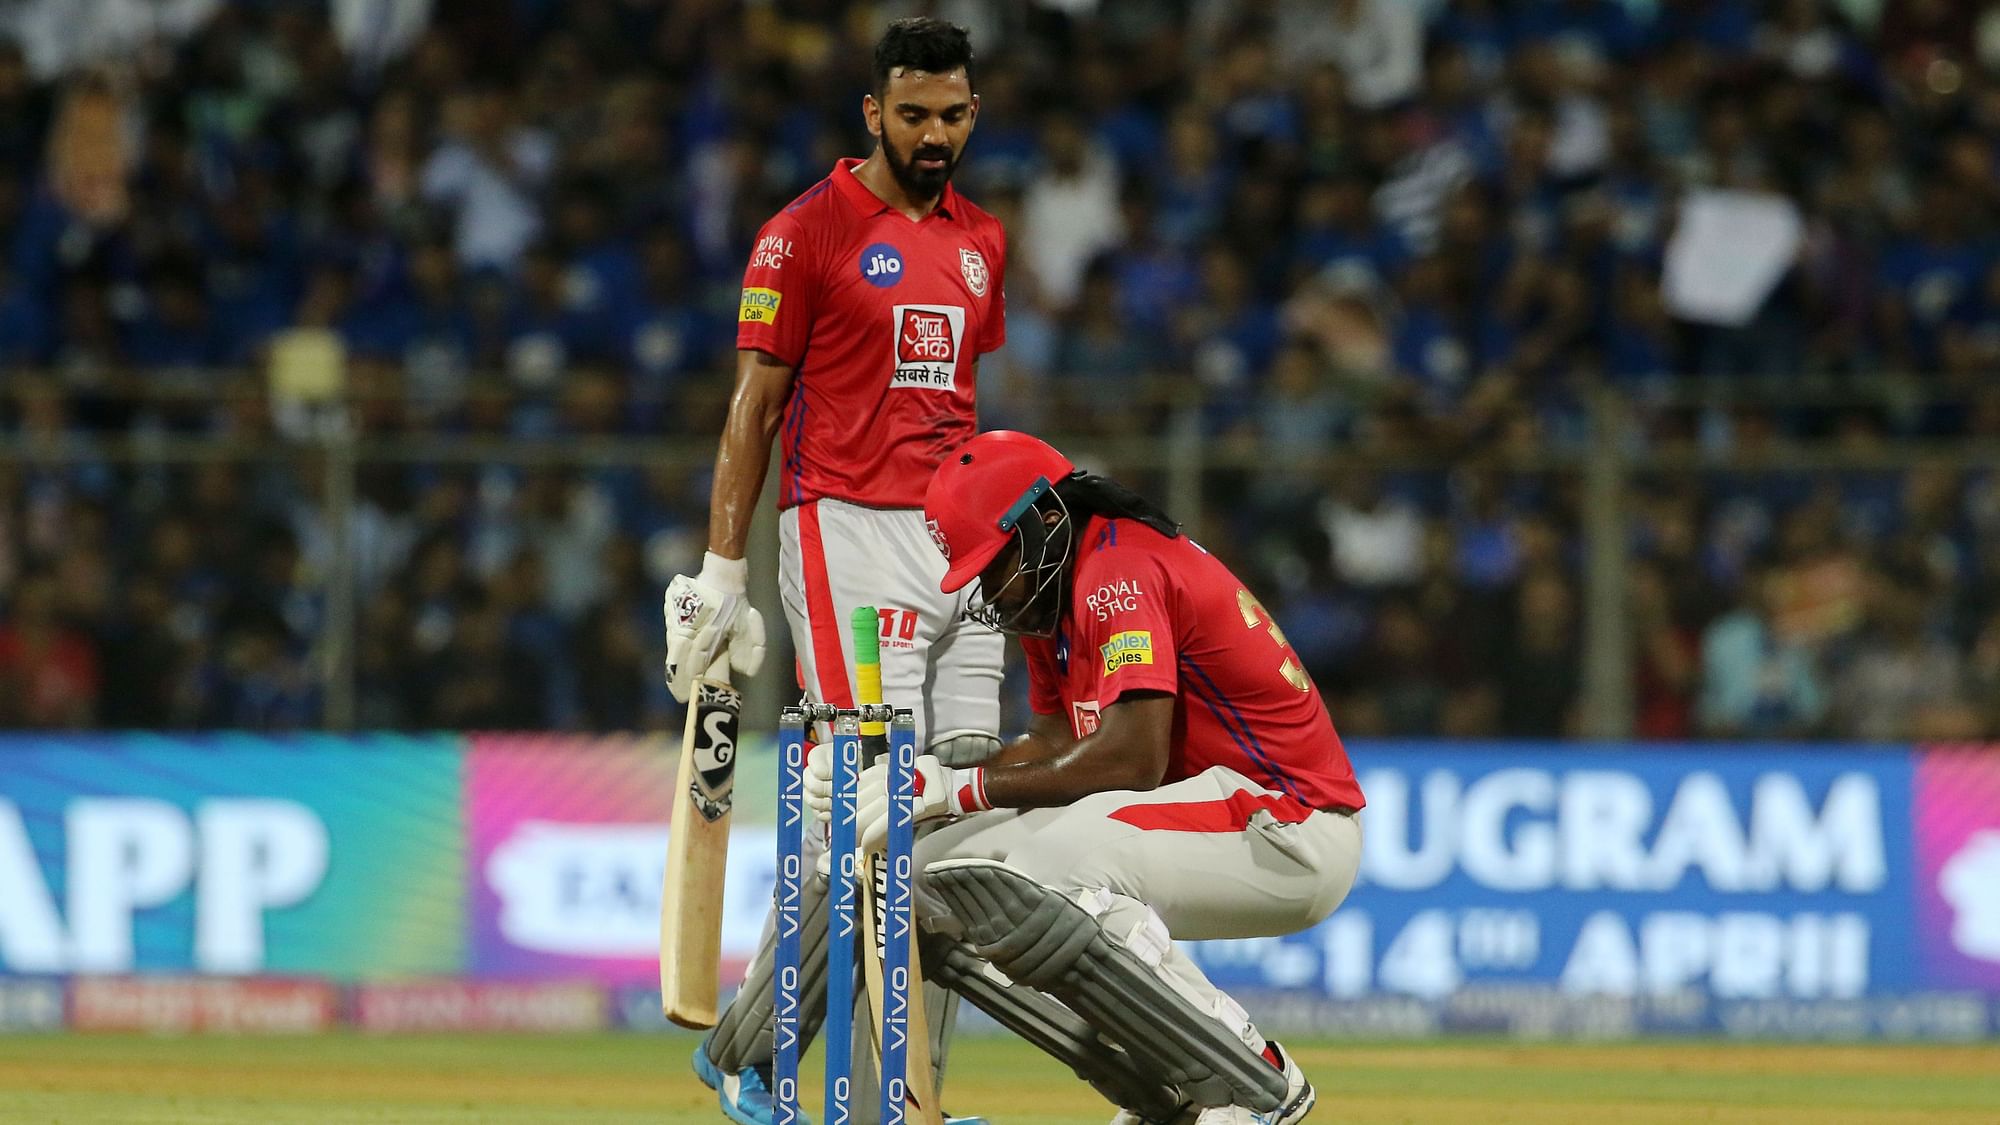 Both Rahul and Gayle have been the leading-run scorers for Kings XI Punjab this season, having scored close to 450 runs in 11 games.